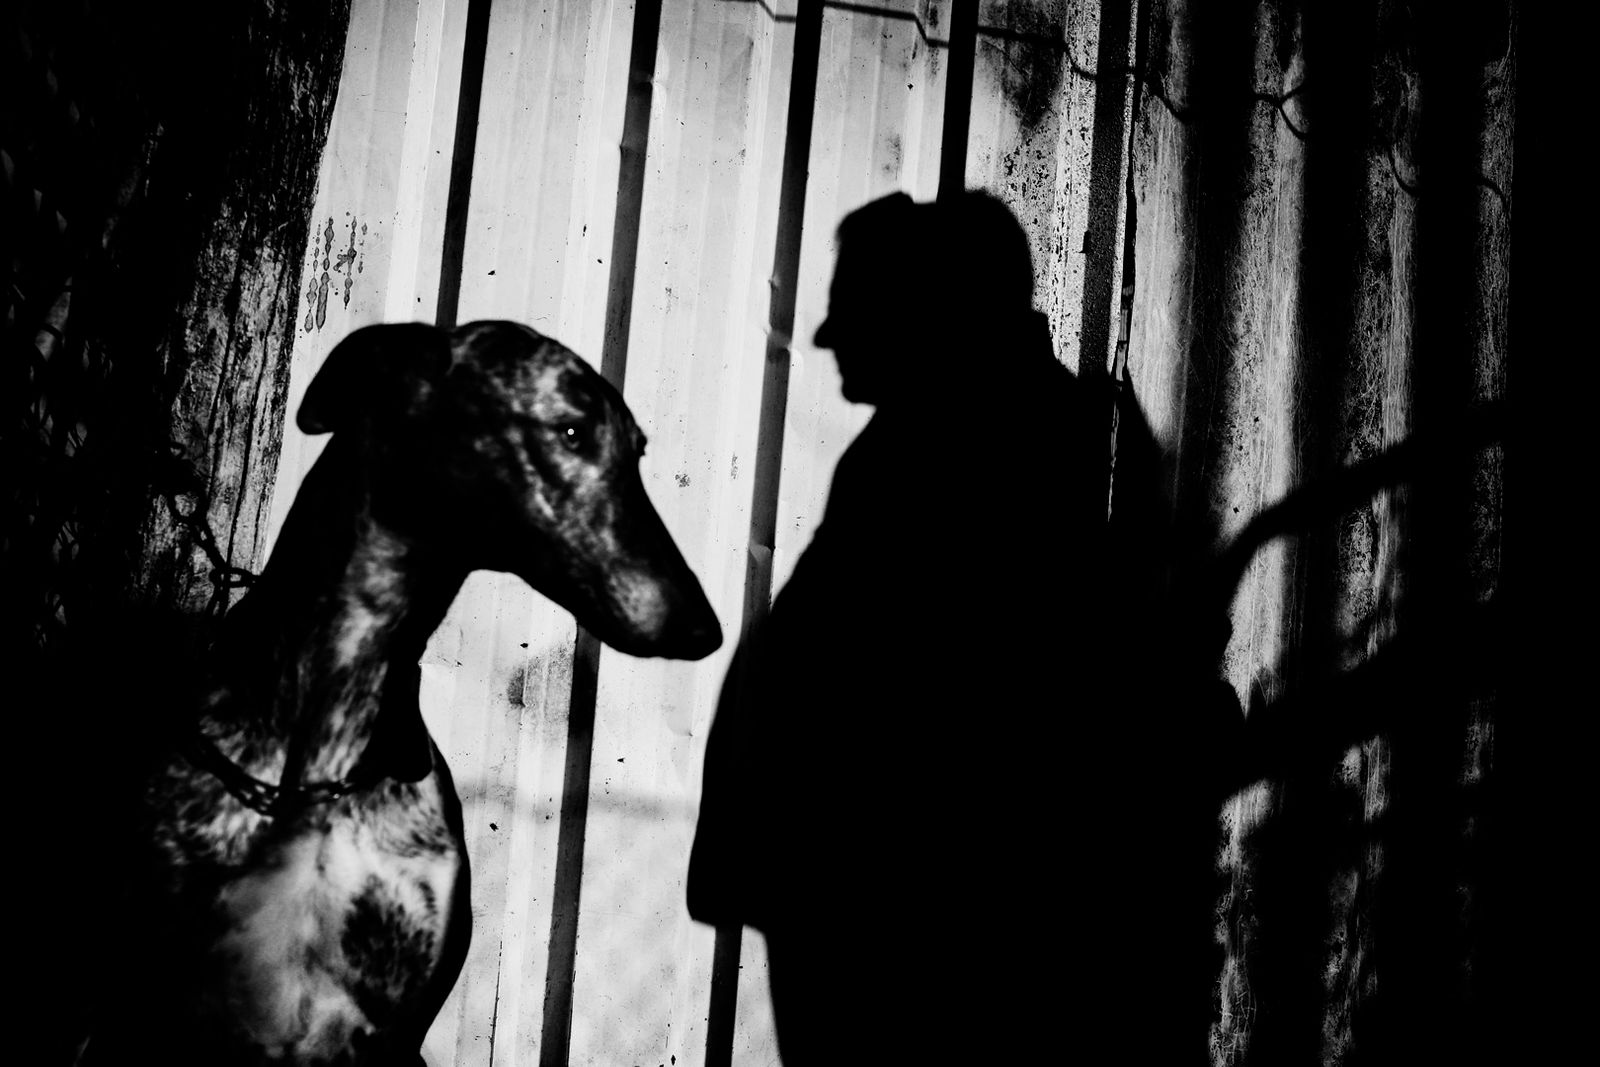 © Antonio González Caro - Image from the hunting shadows photography project